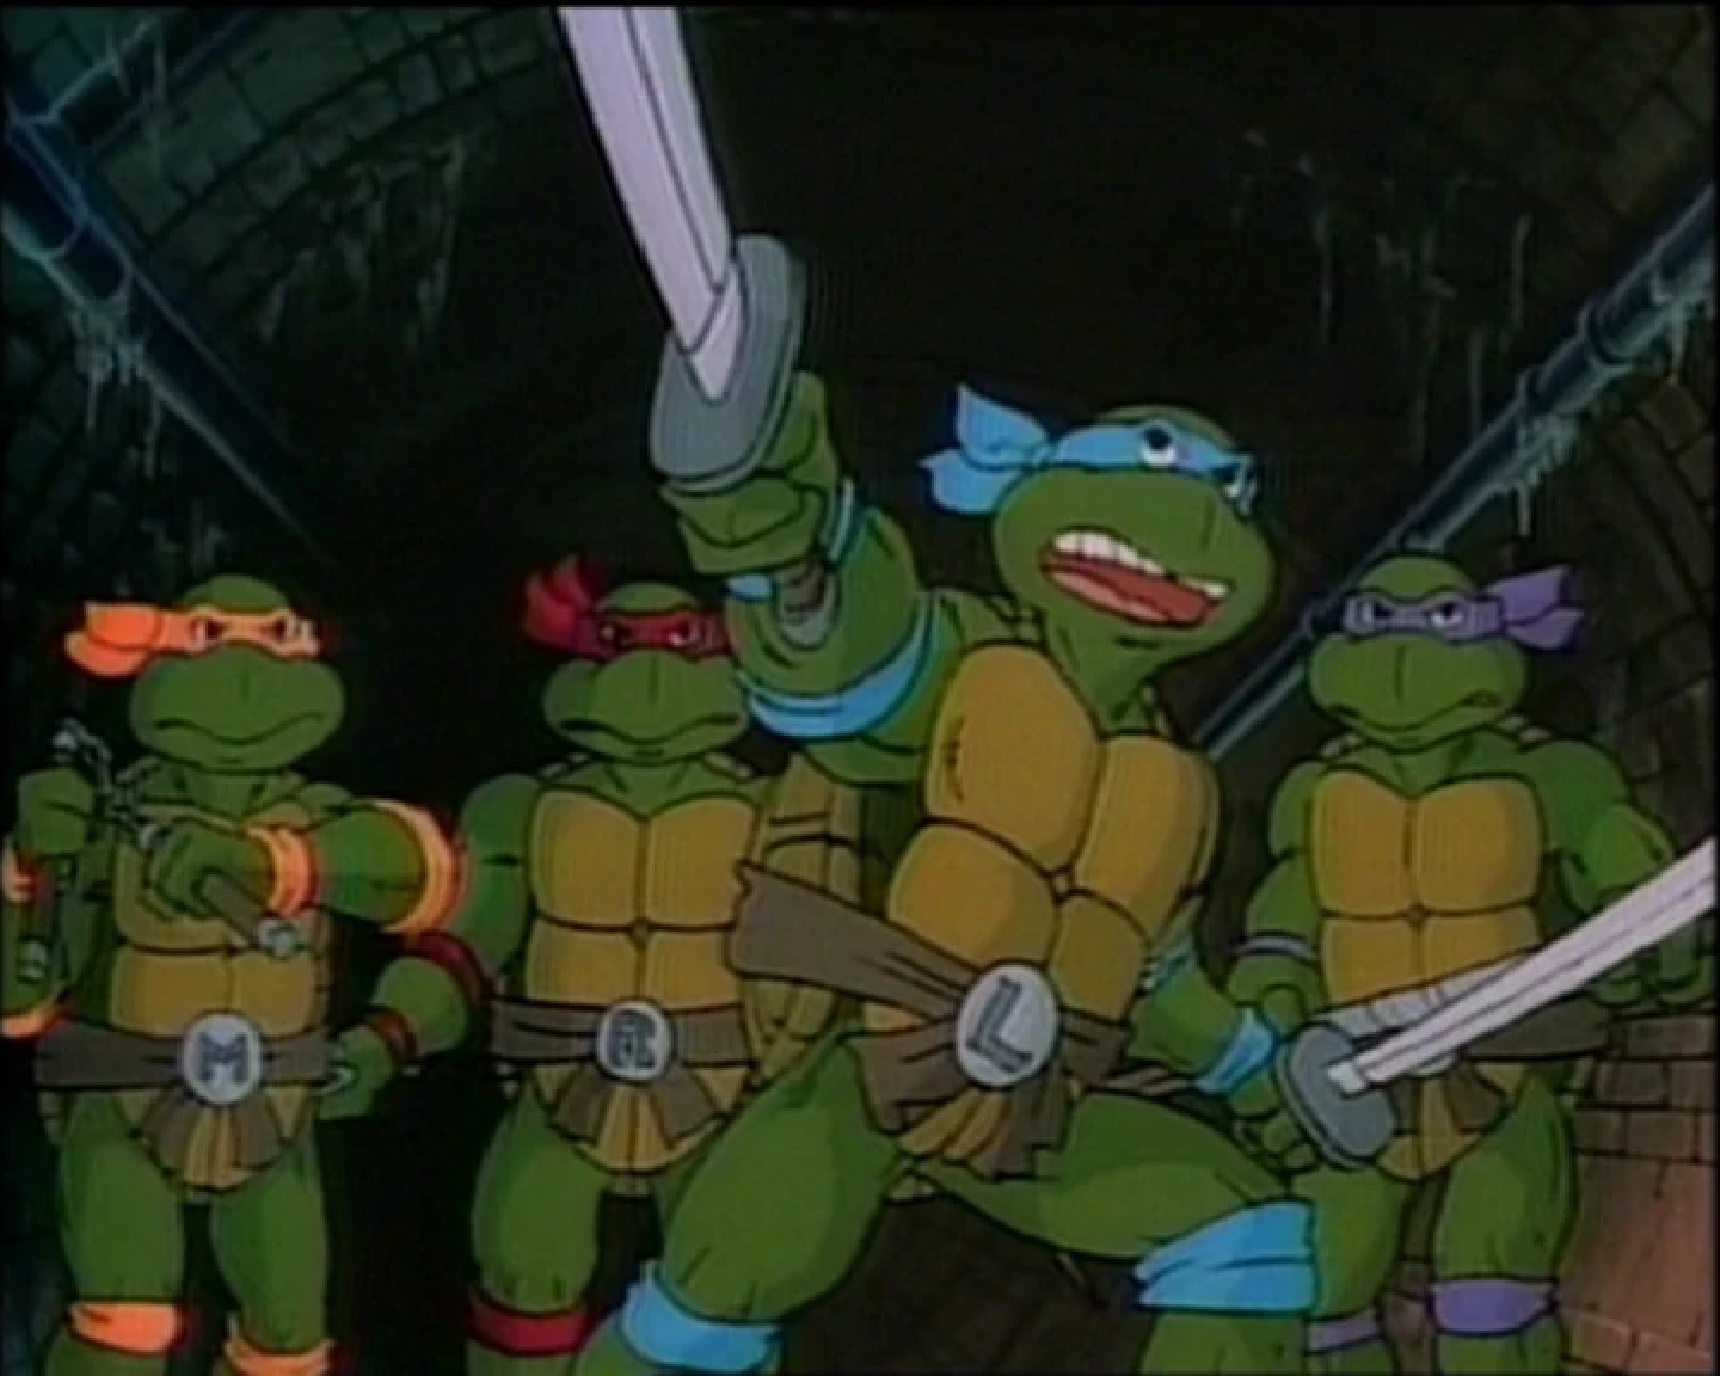 The Rat King: The villain with a thousand faces - TMNT 1987 